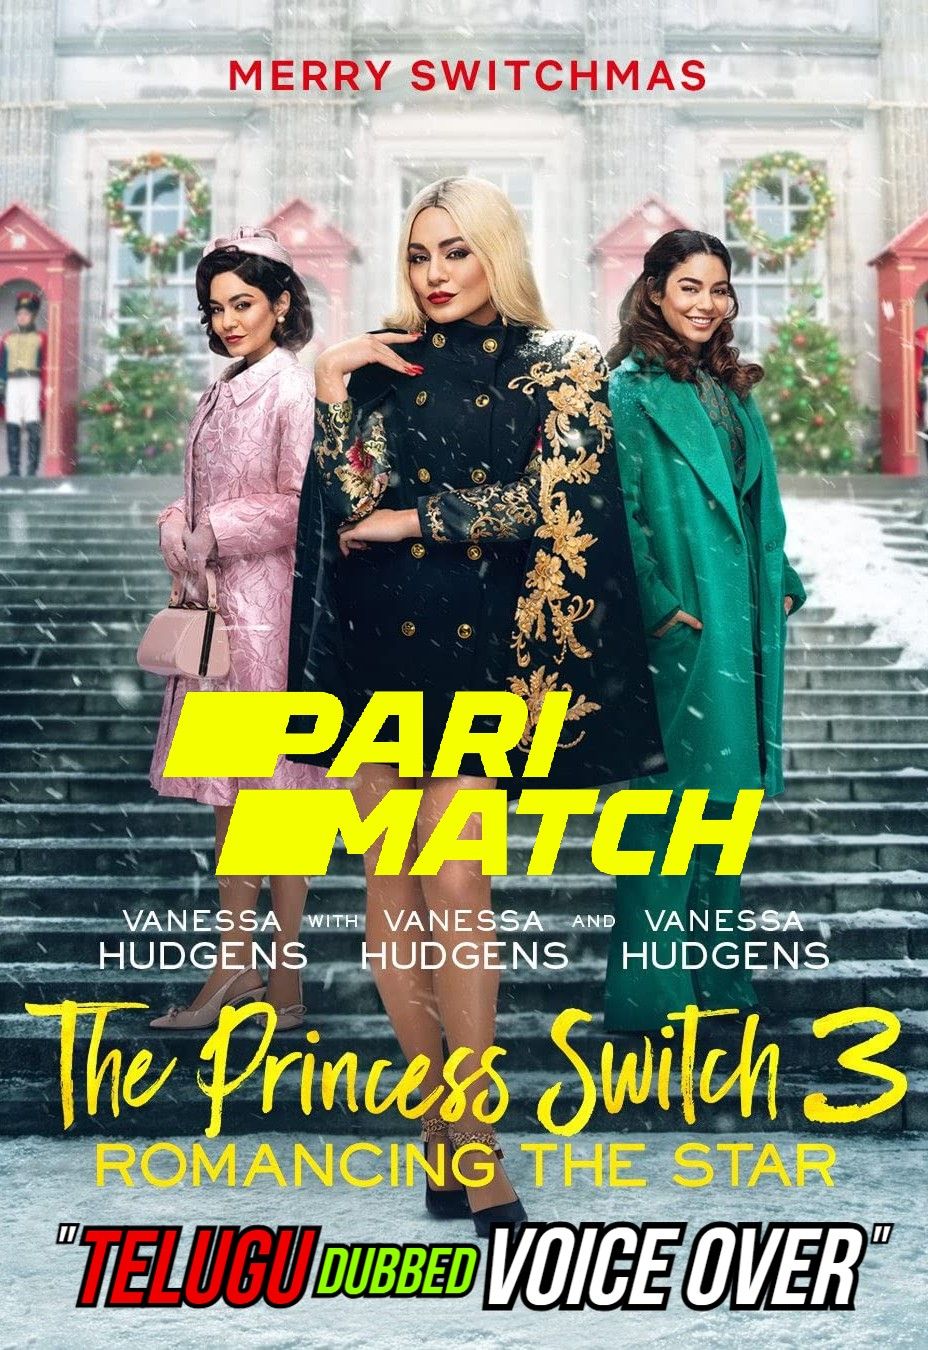 The Princess Switch 3 (2021) Hindi (Voice Over) Dubbed WEBRip download full movie